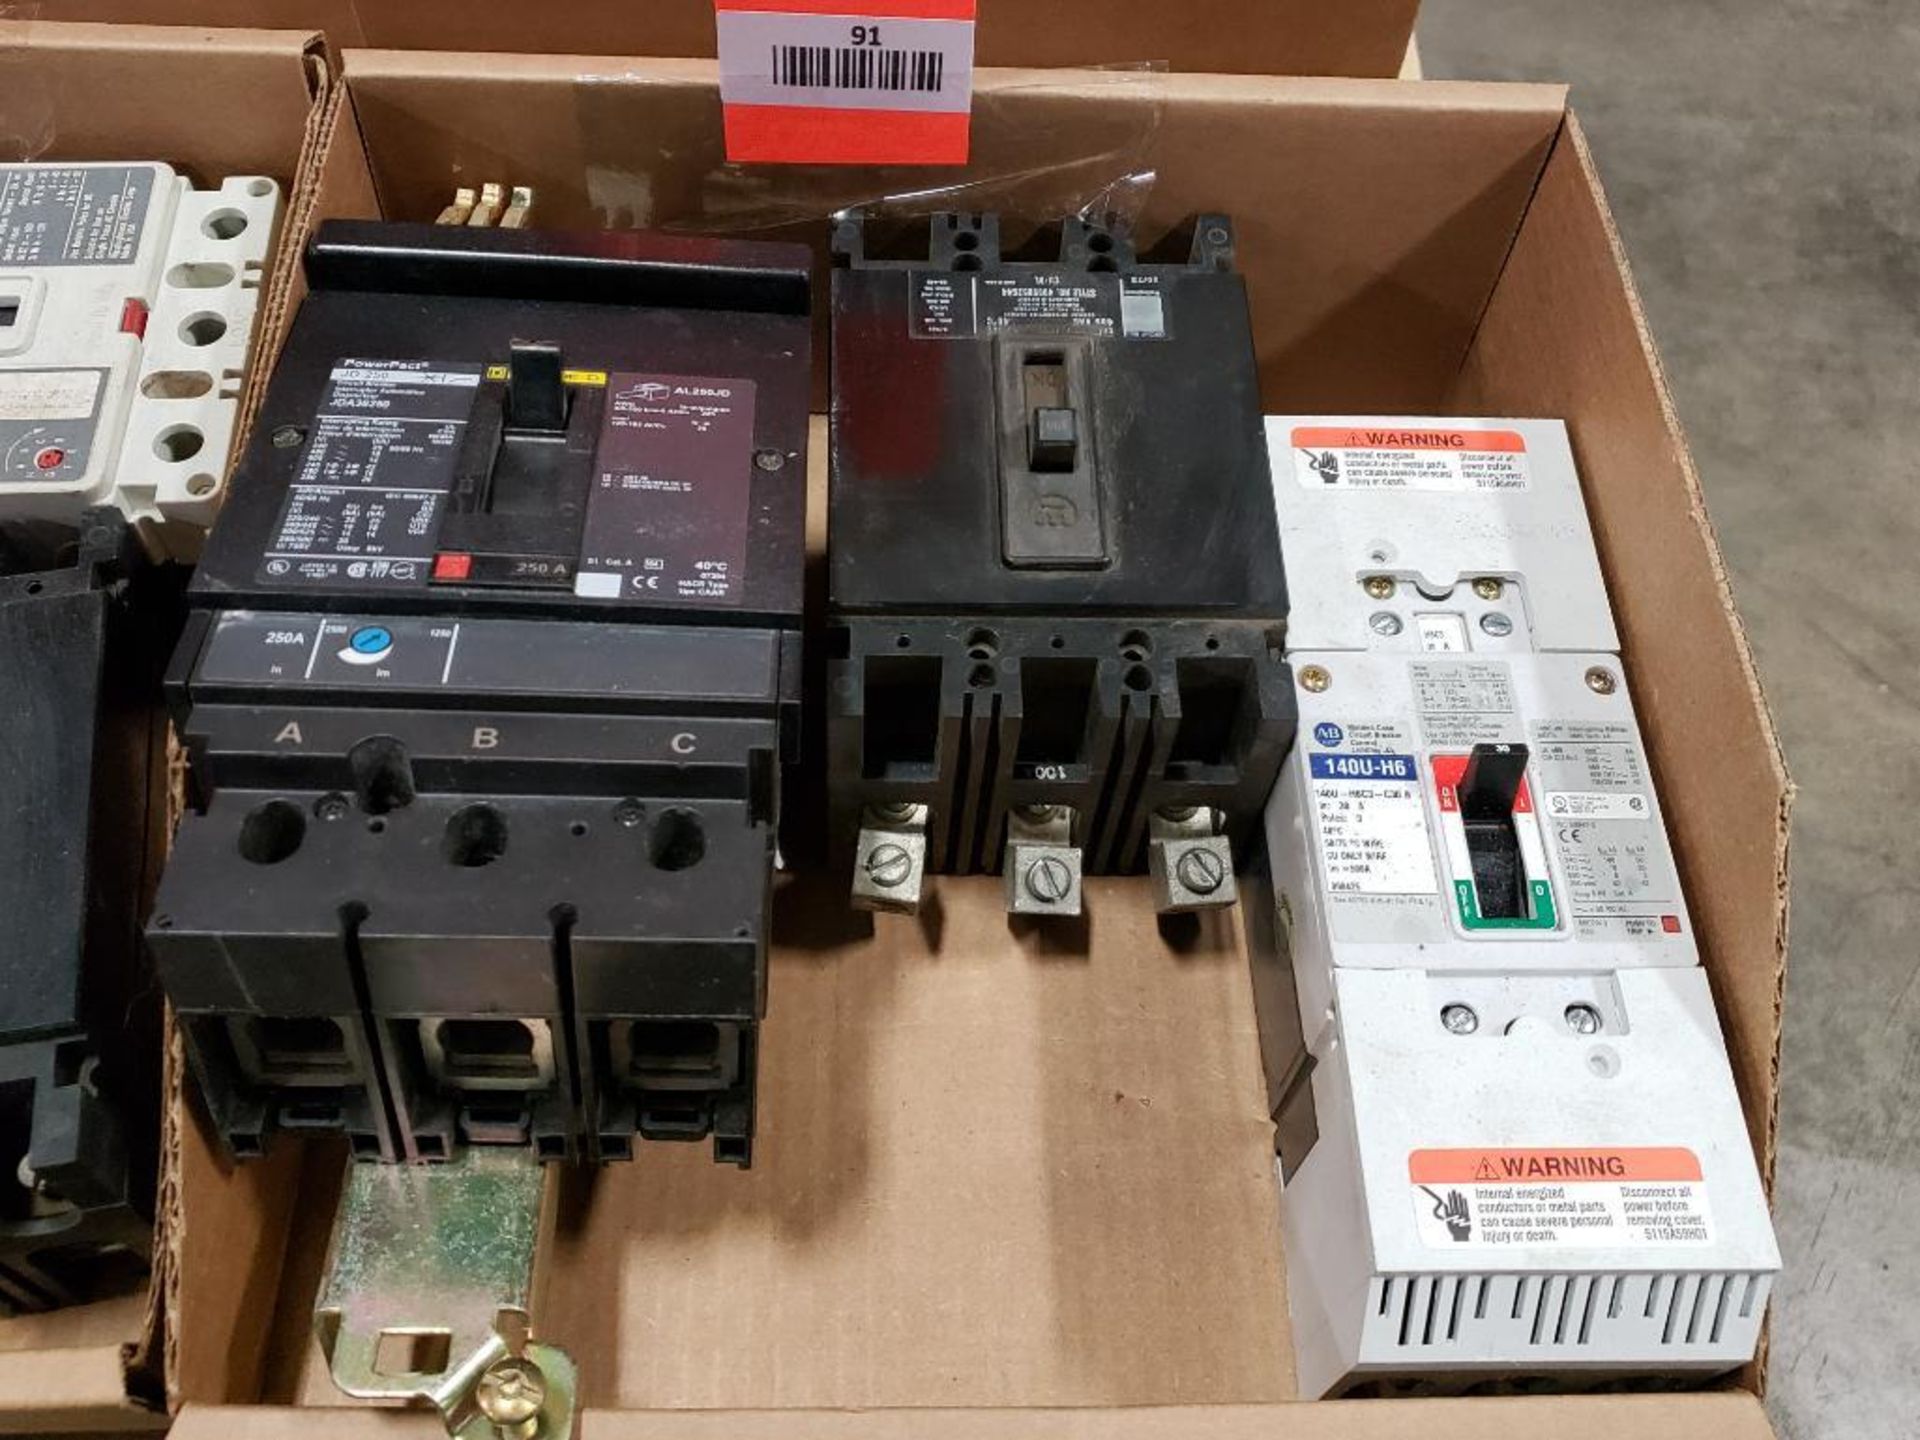 Qty 3 - Assorted electrical breakers. Allen Bradley, Westinghouse, Square-D.